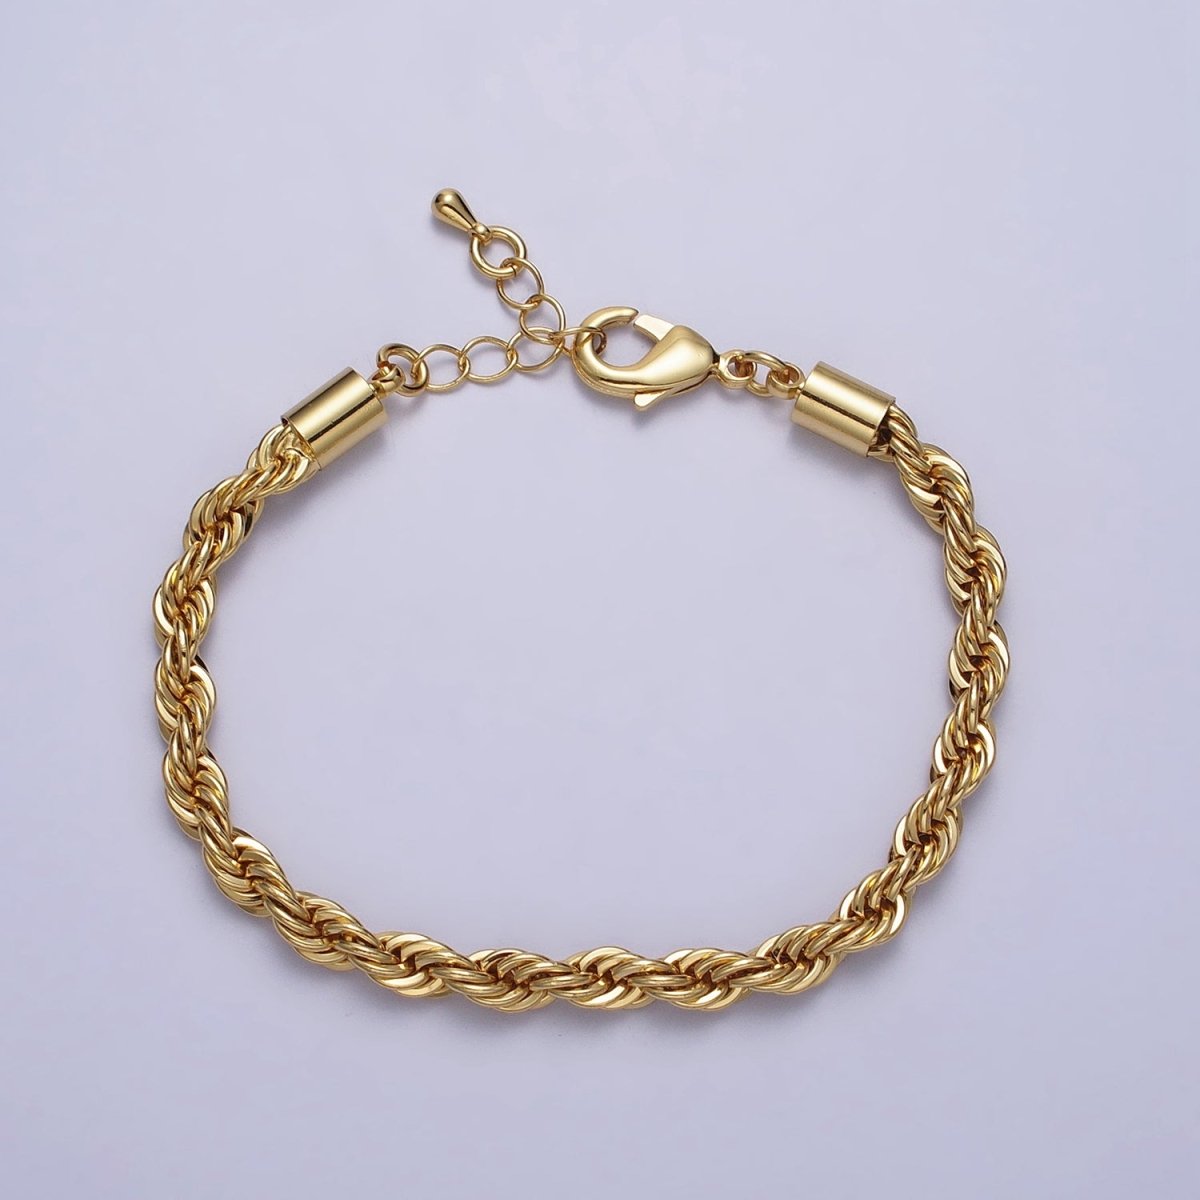 Bold Gold Twisted Rope Chain Bracelet Silver Chunky Rope Chain bracelet 5mm thickness | WA-1540 WA-1541 Clearance Pricing - DLUXCA